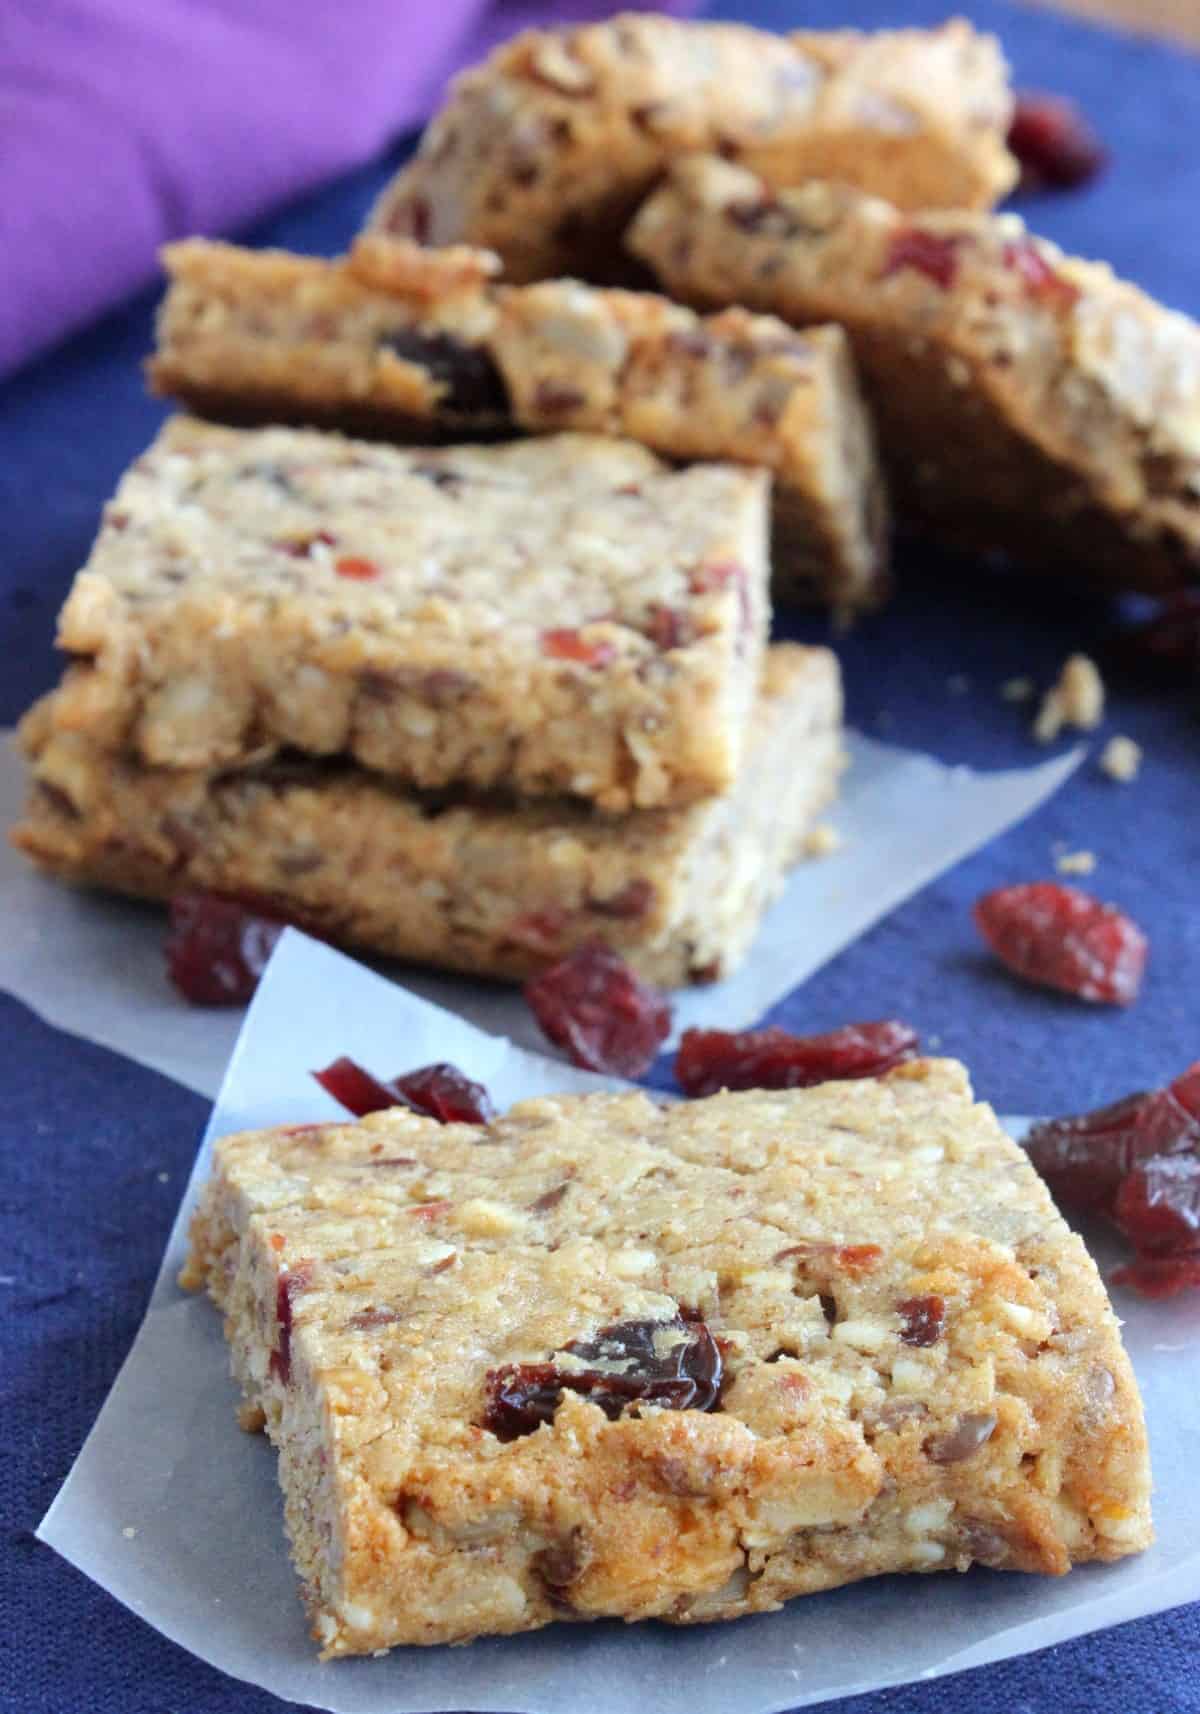 This vegan protein bars recipe made this one bar in front of more behind.